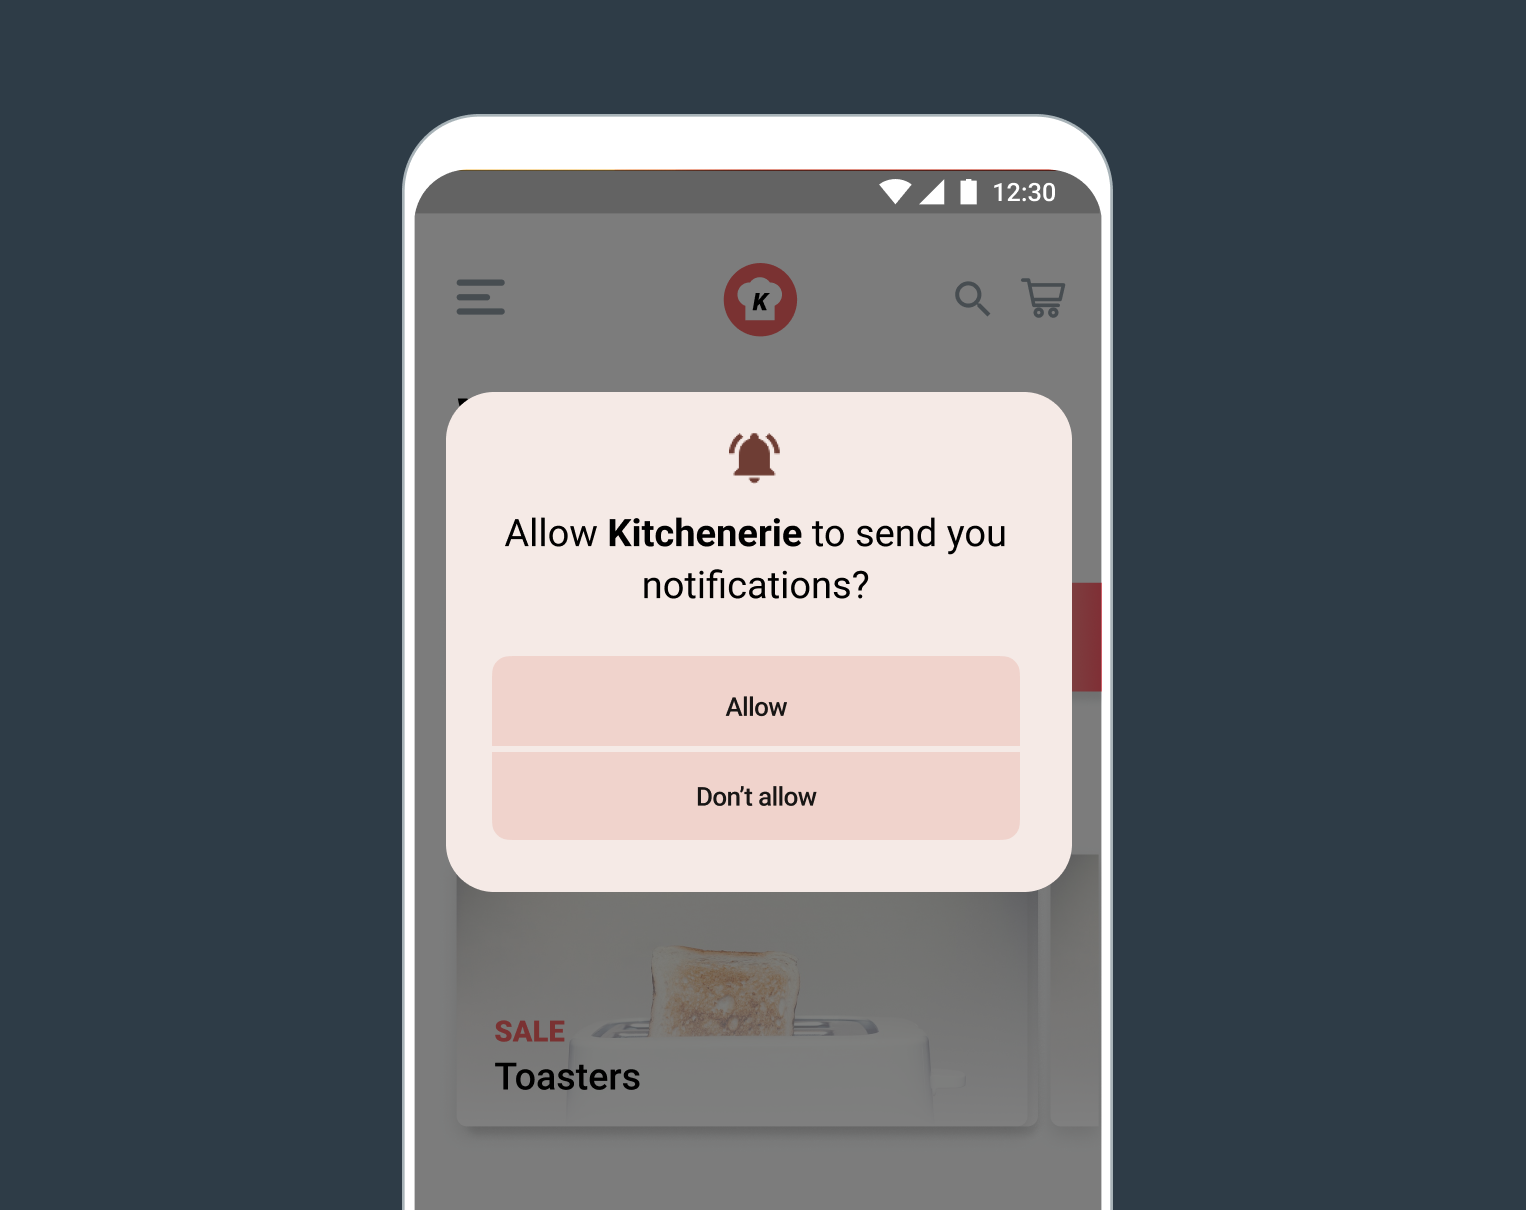 An Android push message asking "Allow Kitchenerie to send you notifications?" with two buttons "Allow" and "Don't allow" at the bottom of the message.